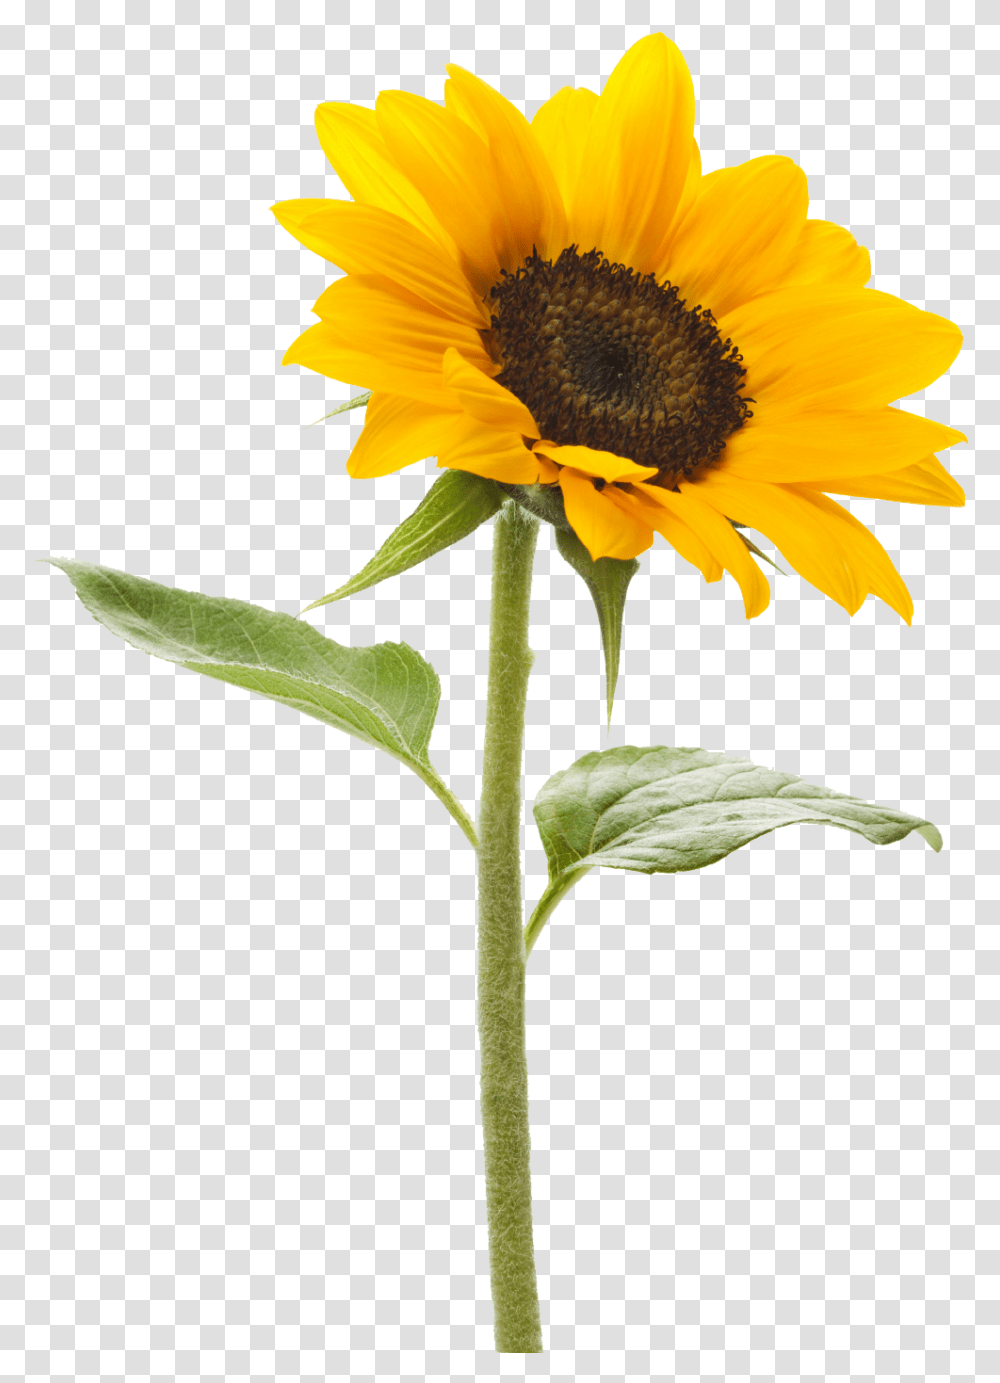 Sunflower Background Background Sunflower, Plant, Blossom, Daisy, Daisies Transparent Png